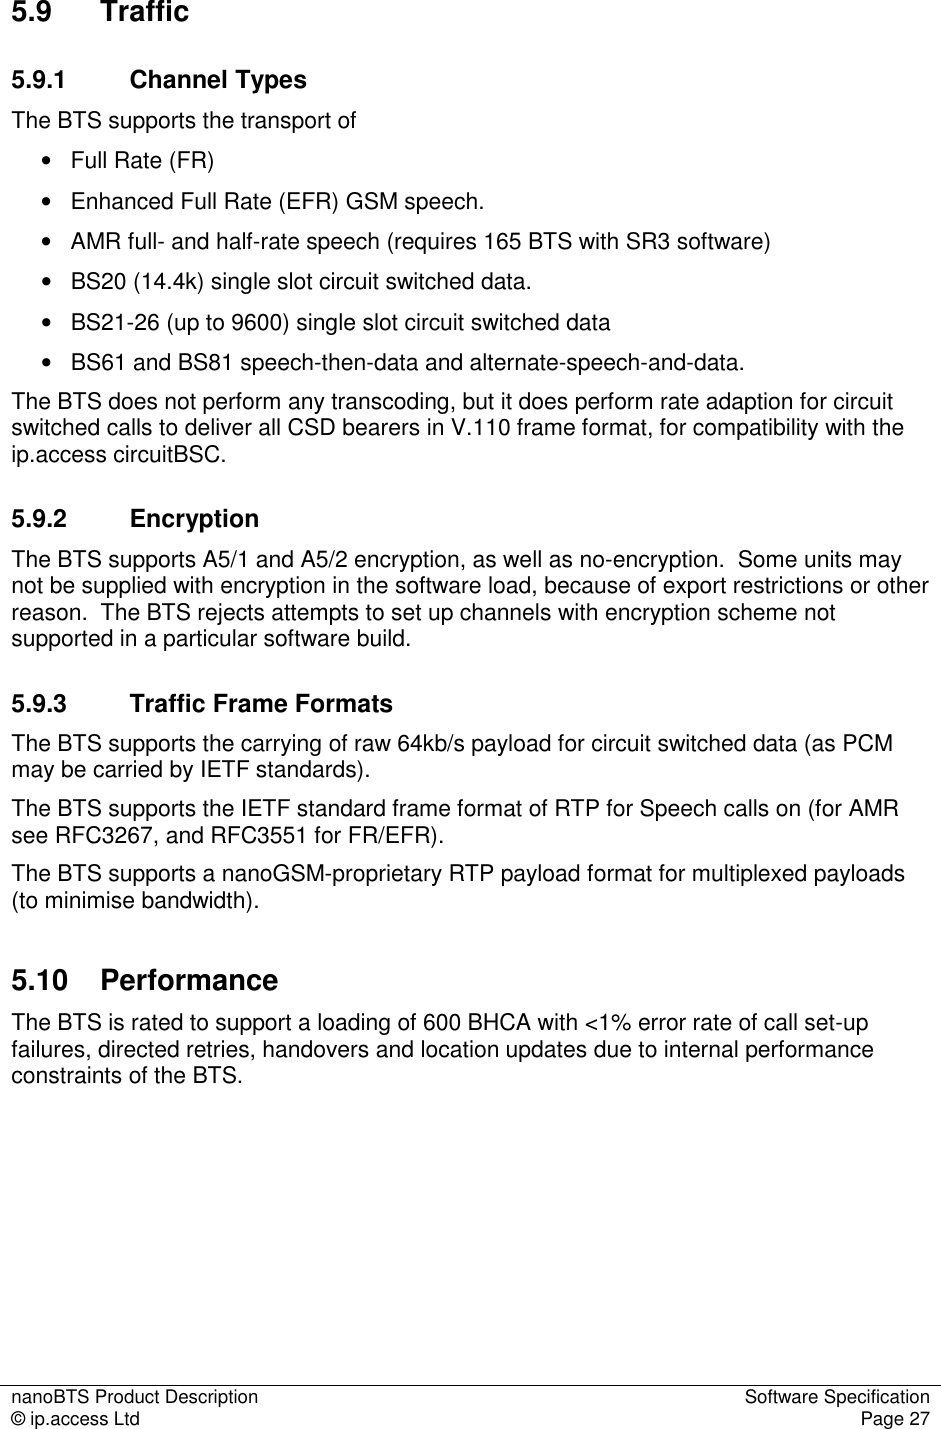 nanoBTS Product Description  Software Specification © ip.access Ltd  Page 27  5.9  Traffic  5.9.1  Channel Types The BTS supports the transport of  •   Full Rate (FR)  •   Enhanced Full Rate (EFR) GSM speech. •   AMR full- and half-rate speech (requires 165 BTS with SR3 software) •   BS20 (14.4k) single slot circuit switched data. •   BS21-26 (up to 9600) single slot circuit switched data •   BS61 and BS81 speech-then-data and alternate-speech-and-data. The BTS does not perform any transcoding, but it does perform rate adaption for circuit switched calls to deliver all CSD bearers in V.110 frame format, for compatibility with the ip.access circuitBSC. 5.9.2  Encryption The BTS supports A5/1 and A5/2 encryption, as well as no-encryption.  Some units may not be supplied with encryption in the software load, because of export restrictions or other reason.  The BTS rejects attempts to set up channels with encryption scheme not supported in a particular software build. 5.9.3  Traffic Frame Formats The BTS supports the carrying of raw 64kb/s payload for circuit switched data (as PCM may be carried by IETF standards). The BTS supports the IETF standard frame format of RTP for Speech calls on (for AMR see RFC3267, and RFC3551 for FR/EFR). The BTS supports a nanoGSM-proprietary RTP payload format for multiplexed payloads (to minimise bandwidth). 5.10  Performance  The BTS is rated to support a loading of 600 BHCA with &lt;1% error rate of call set-up failures, directed retries, handovers and location updates due to internal performance constraints of the BTS. 